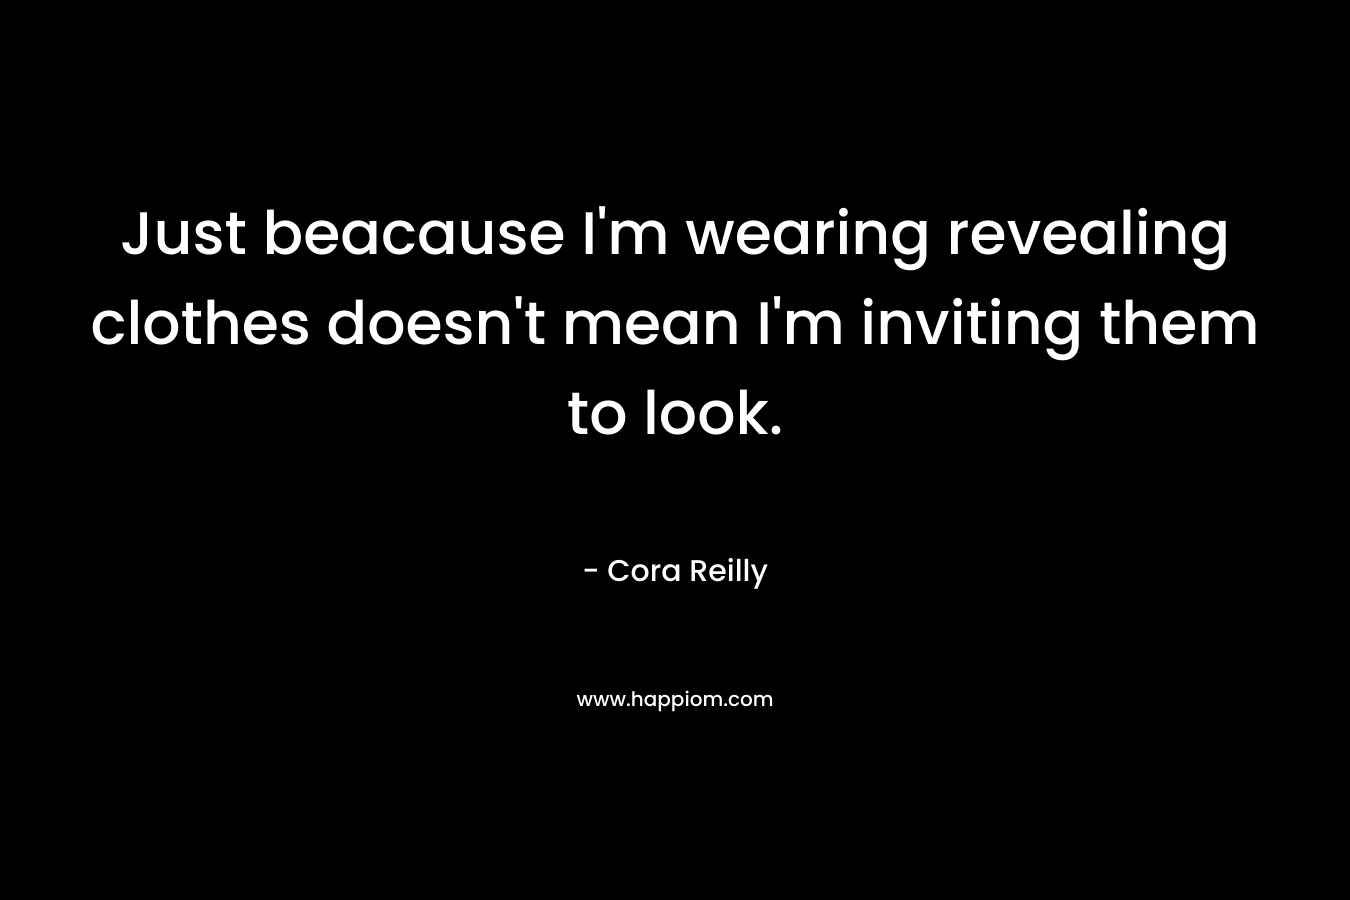 Just beacause I’m wearing revealing clothes doesn’t mean I’m inviting them to look. – Cora Reilly